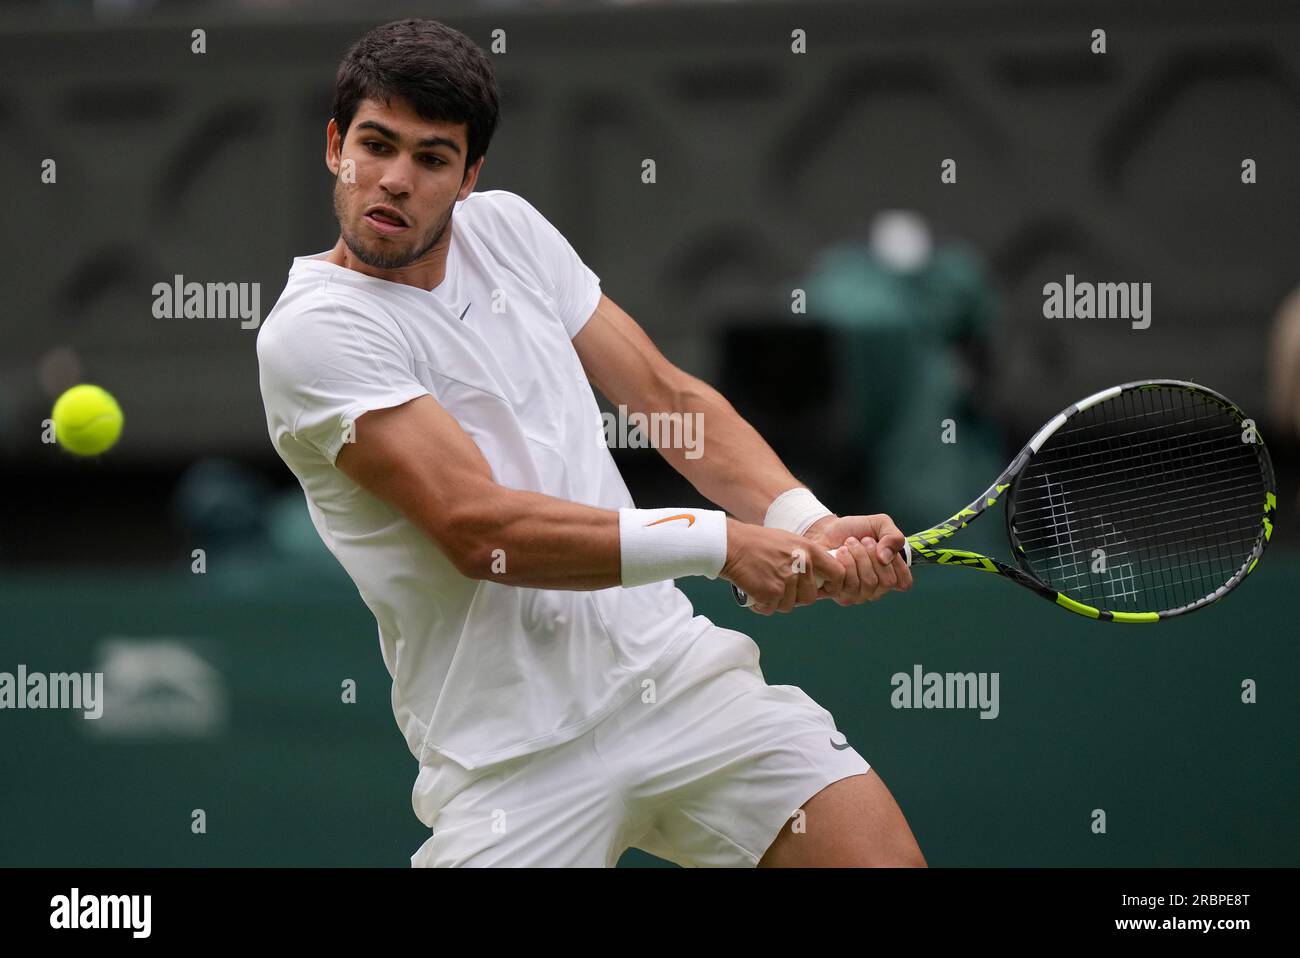 Spains Carlos Alcaraz returns to Italys Matteo Berrettini in a mens singles match on day eight of the Wimbledon tennis championships in London, Monday, July 10, 2023